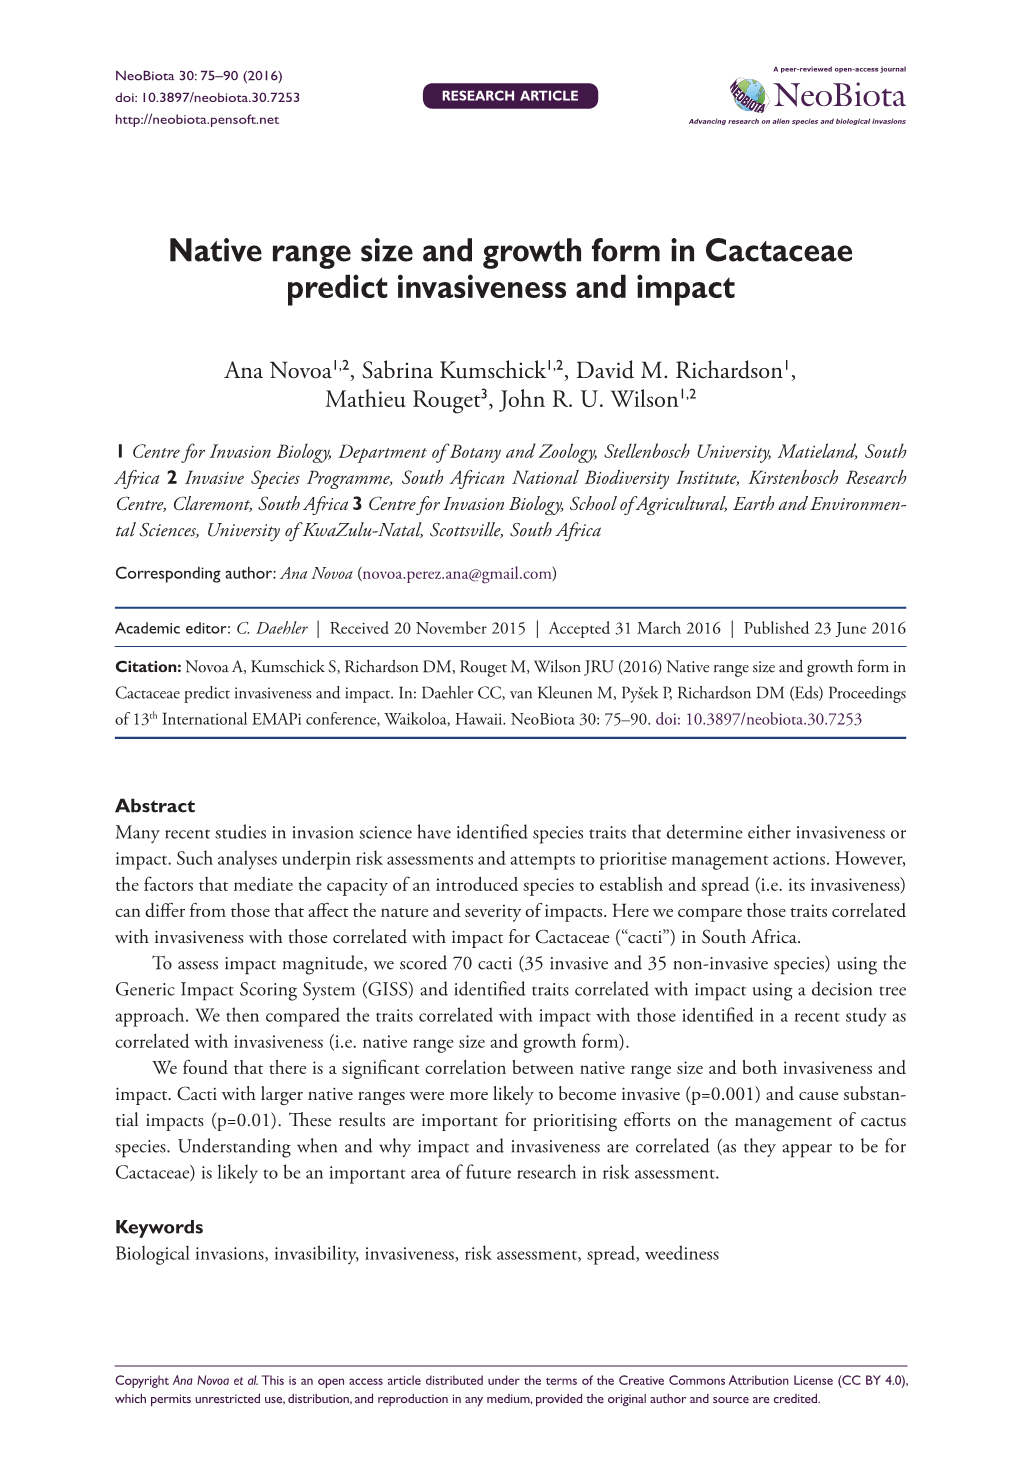 ﻿Native Range Size and Growth Form in Cactaceae Predict Invasiveness